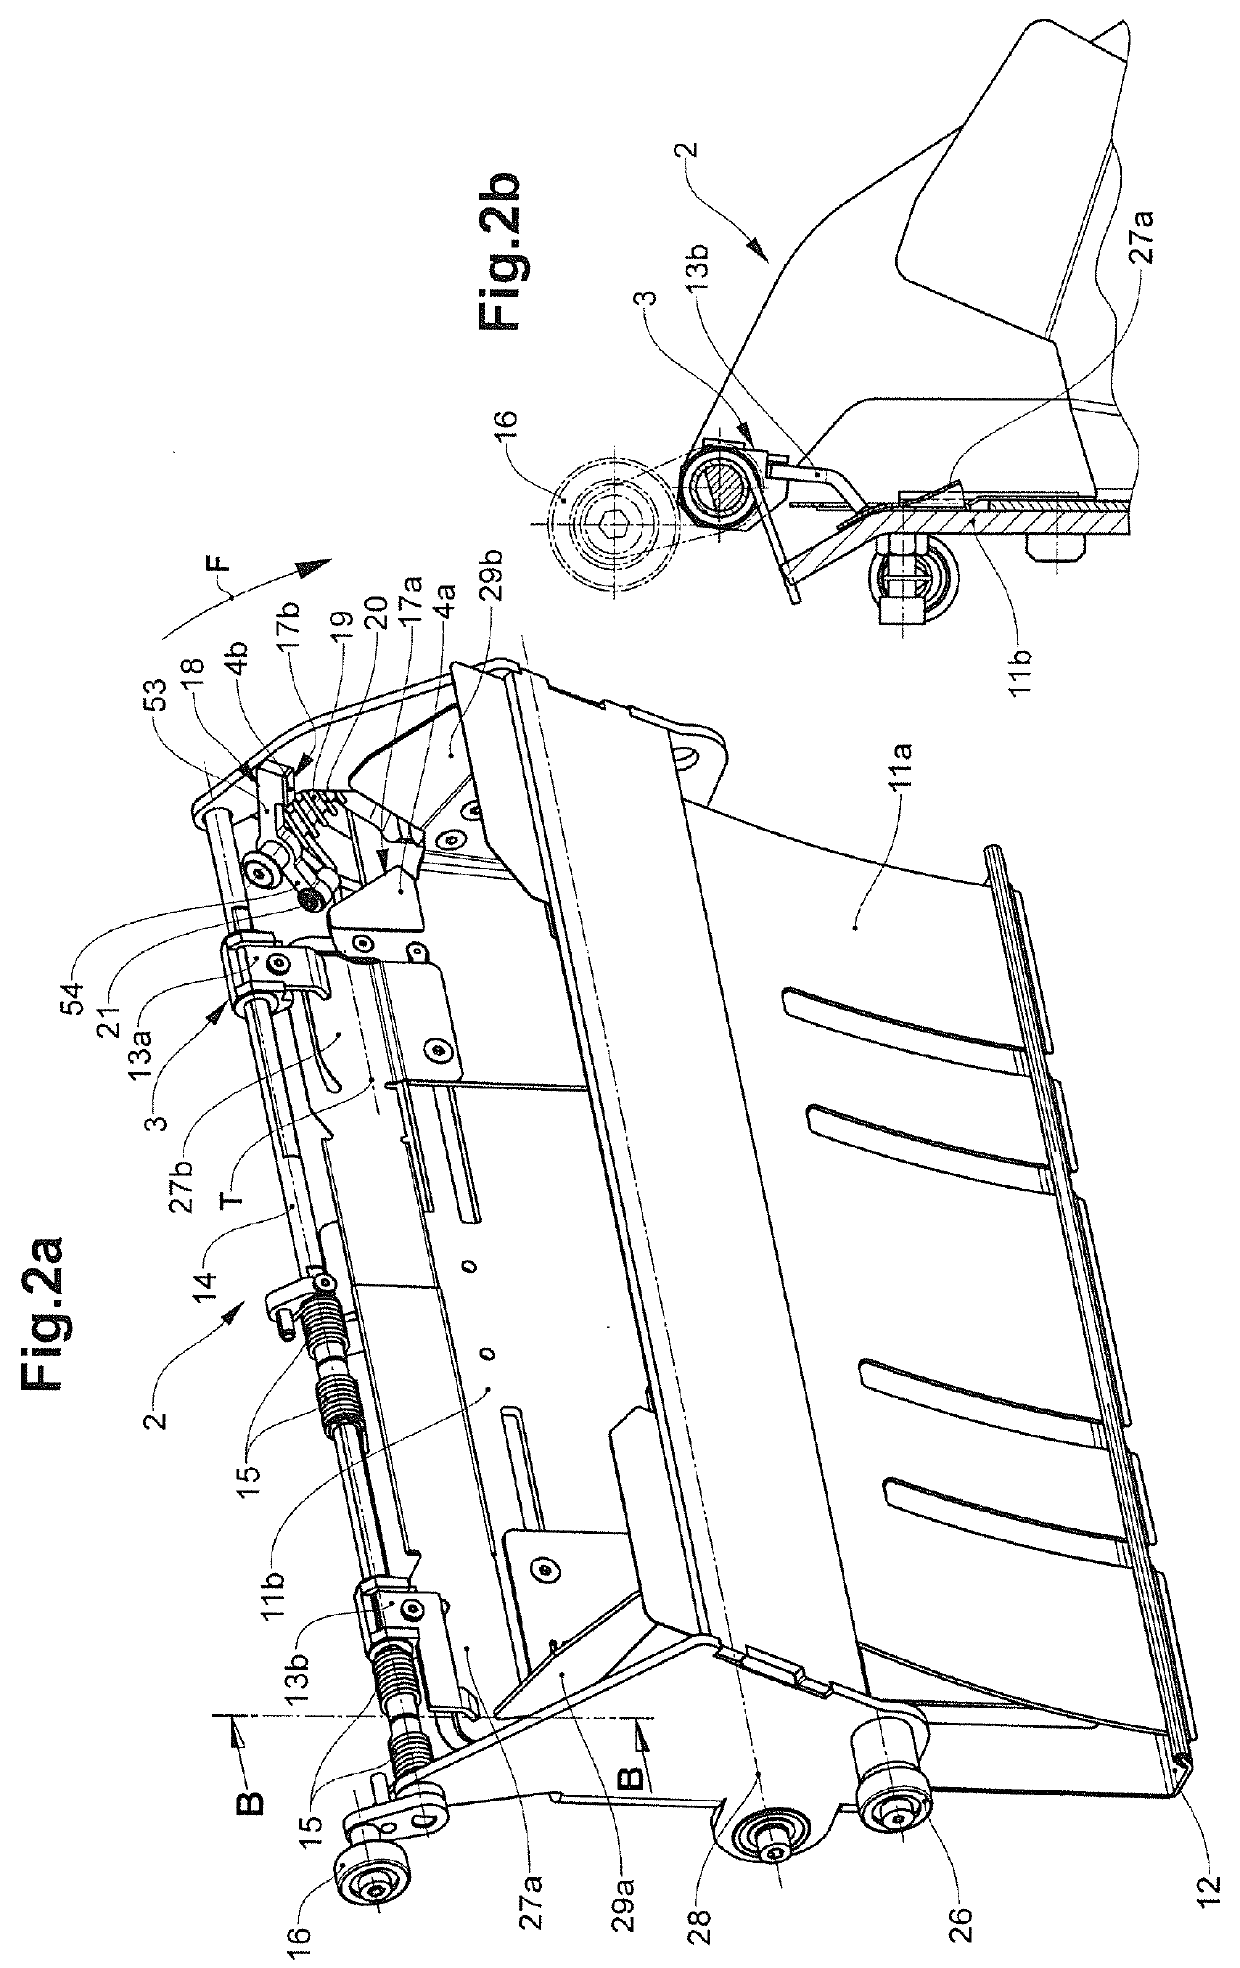 Device and method for separating product parts of a multi-part product